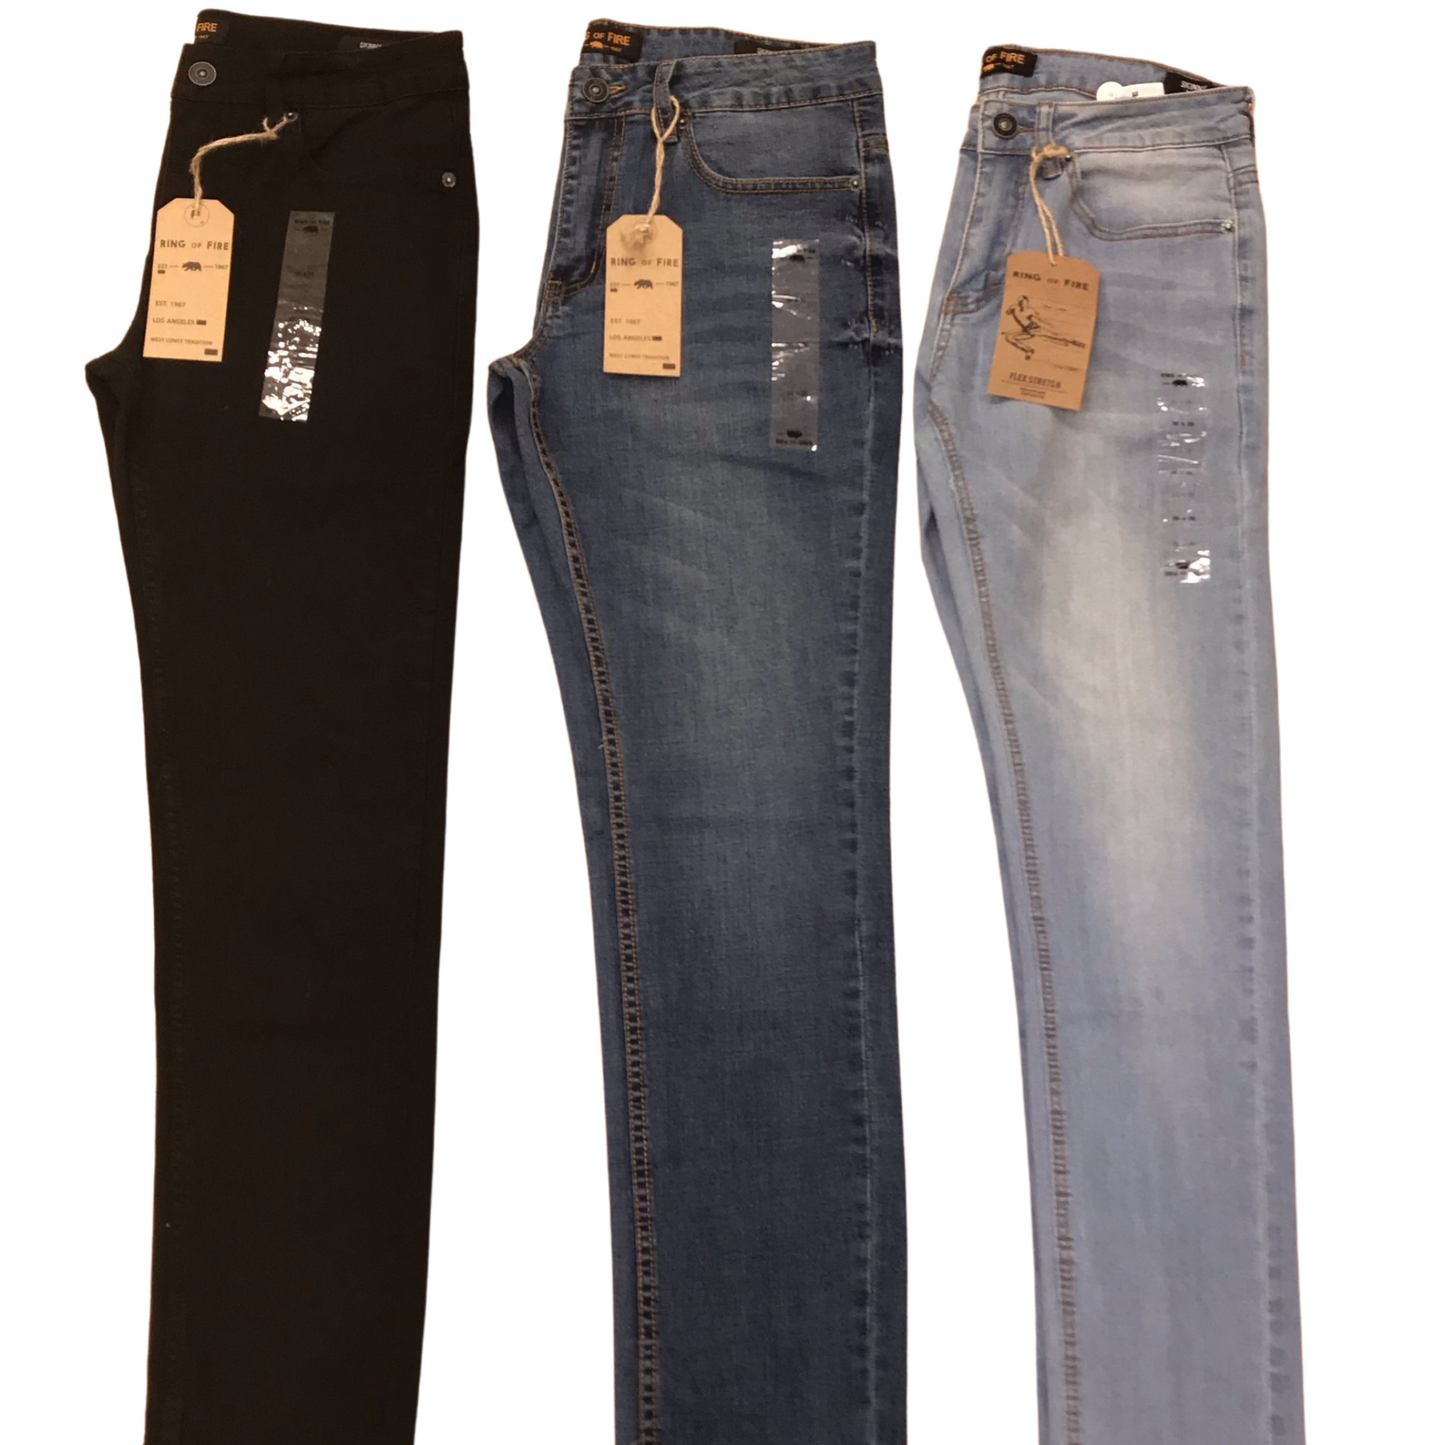 Ring of Fire Skinny Jeans (3 Washes! 38X32)